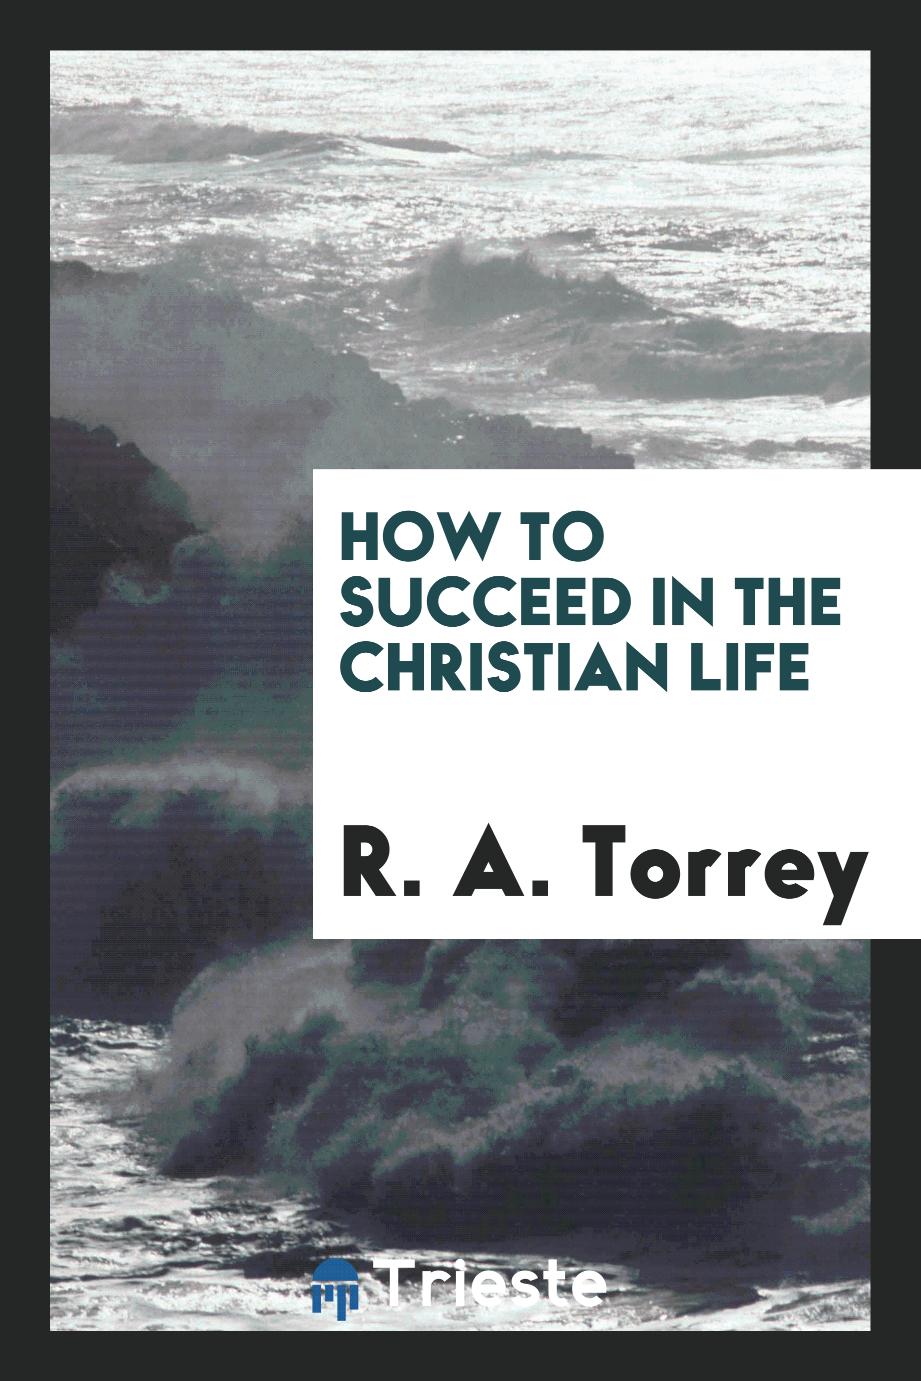 How to succeed in the Christian life